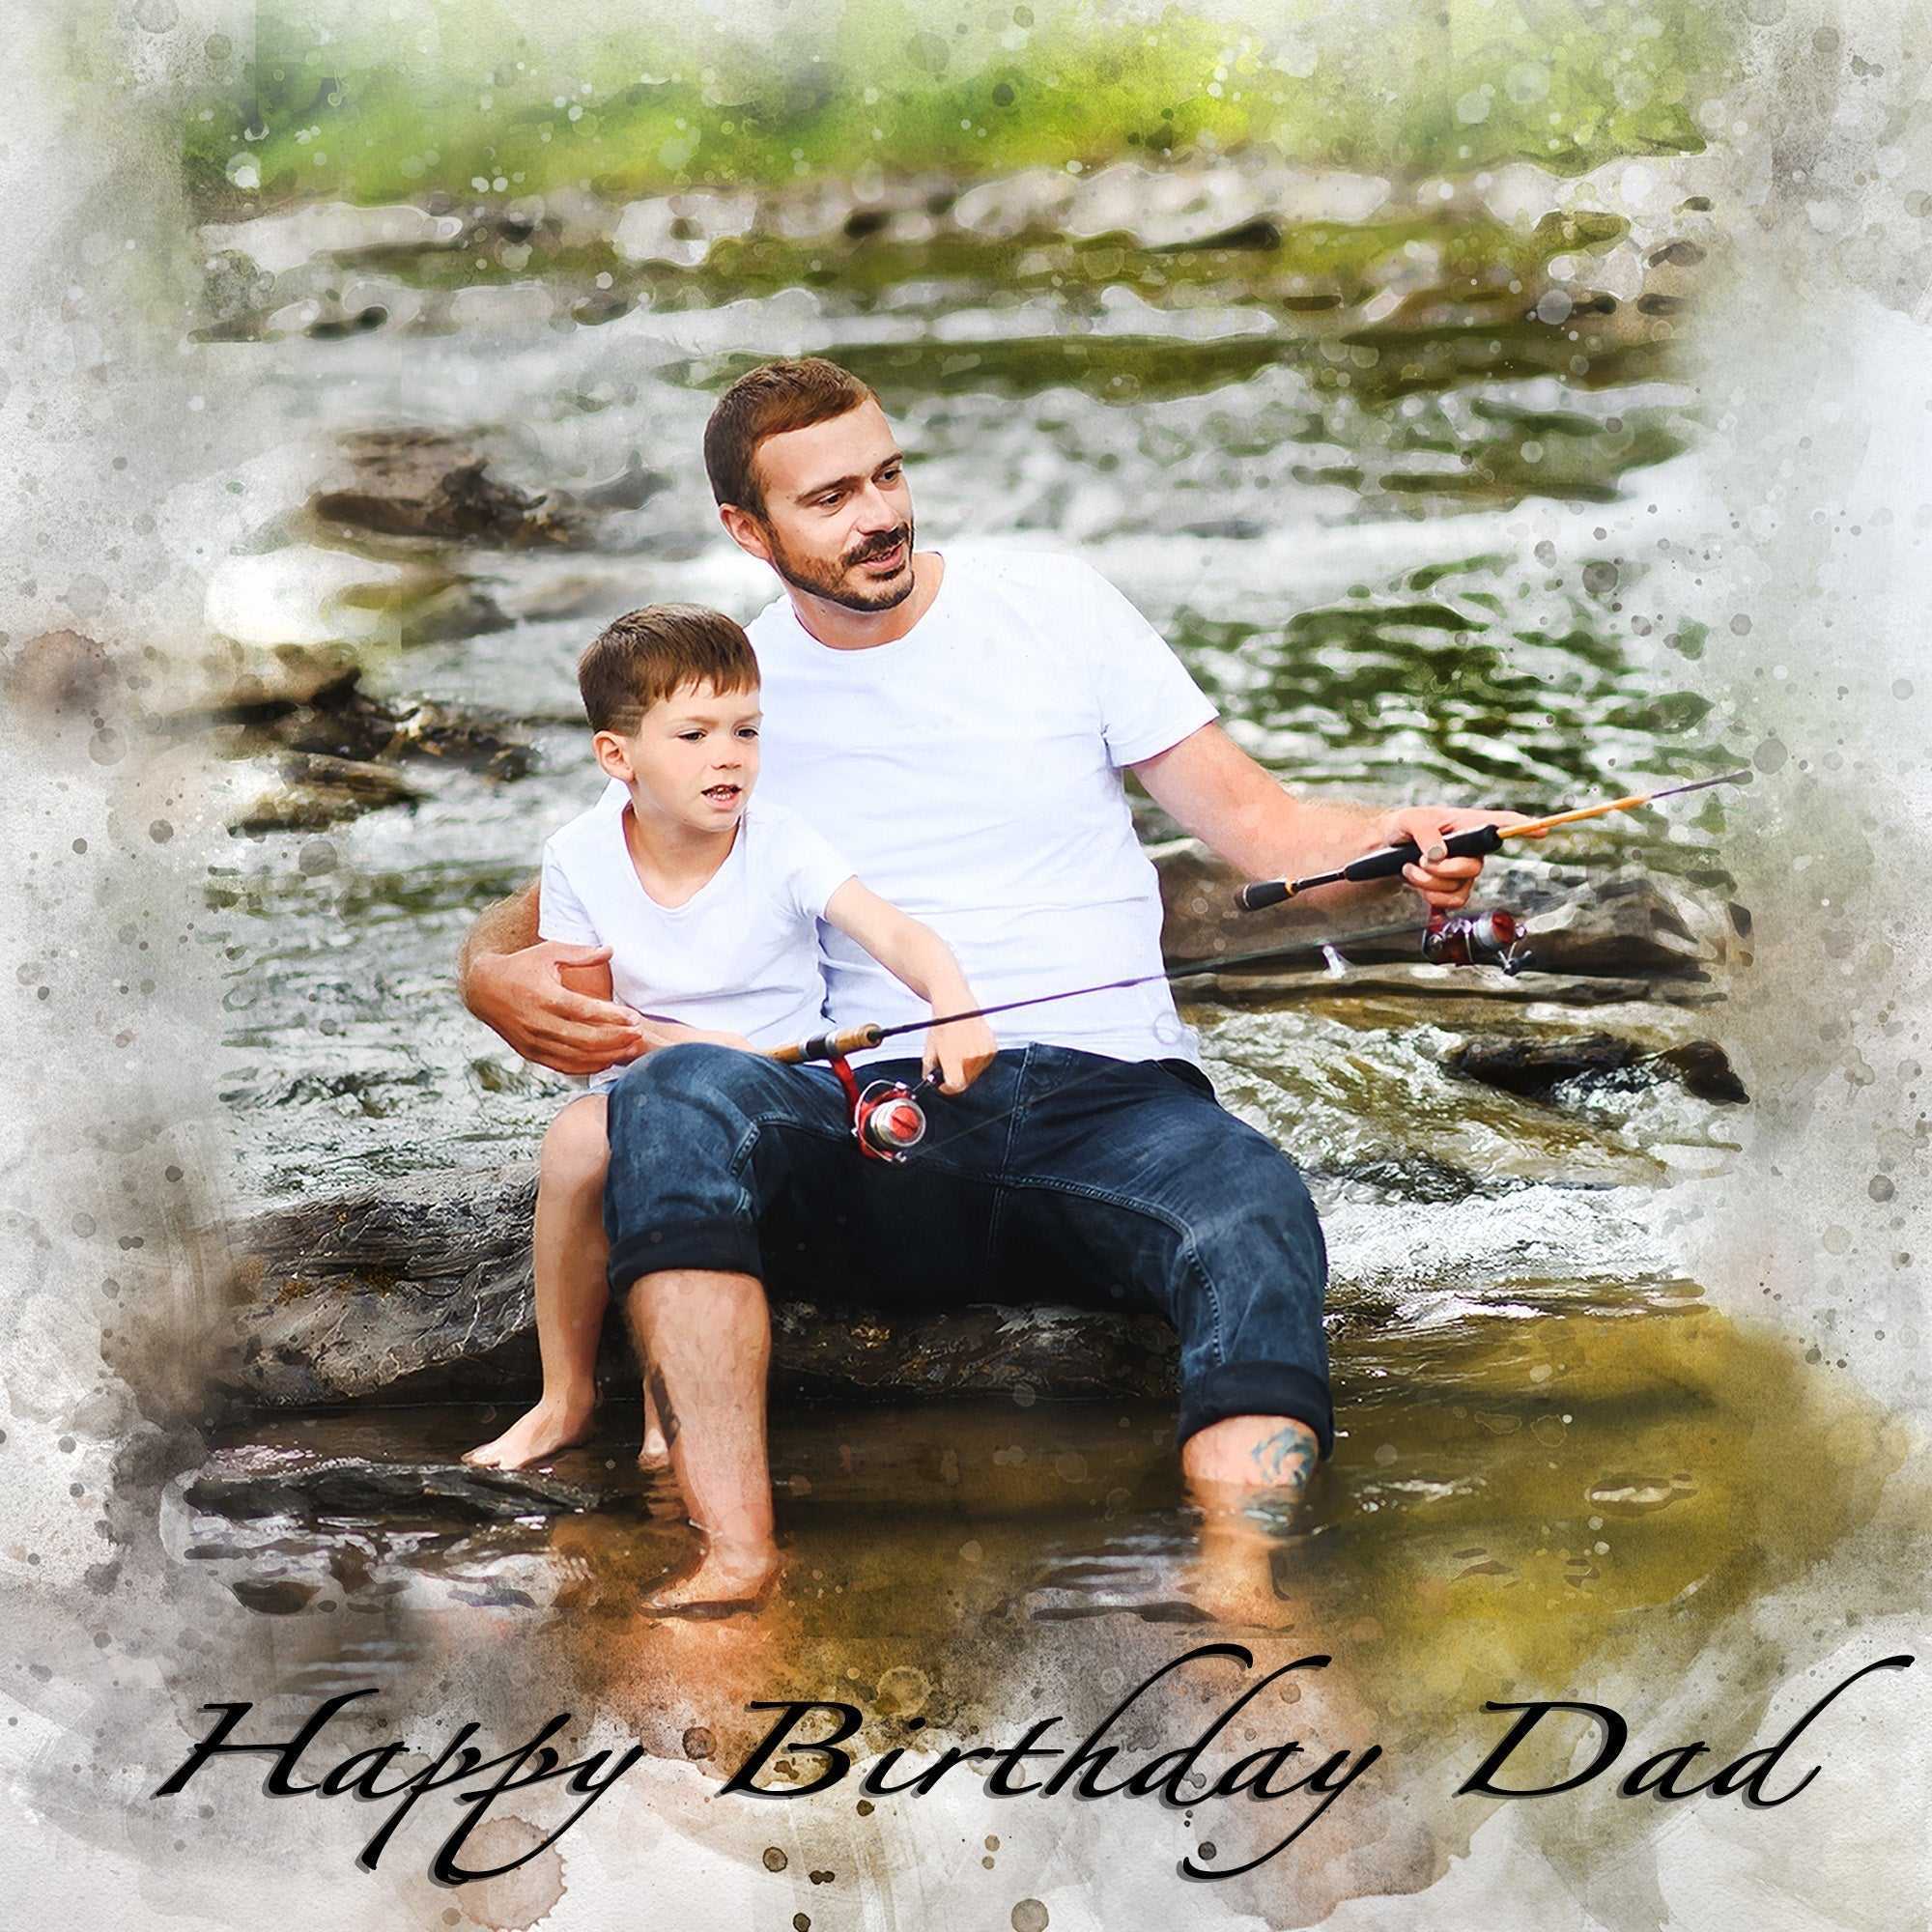 Birthday Gifts for Fisher Dad | Gifts for Fisher | Gifts for Men | Gifts for Him | Gift ideas for Fisher Dad | Christmas Gift for Father - FromPicToArt